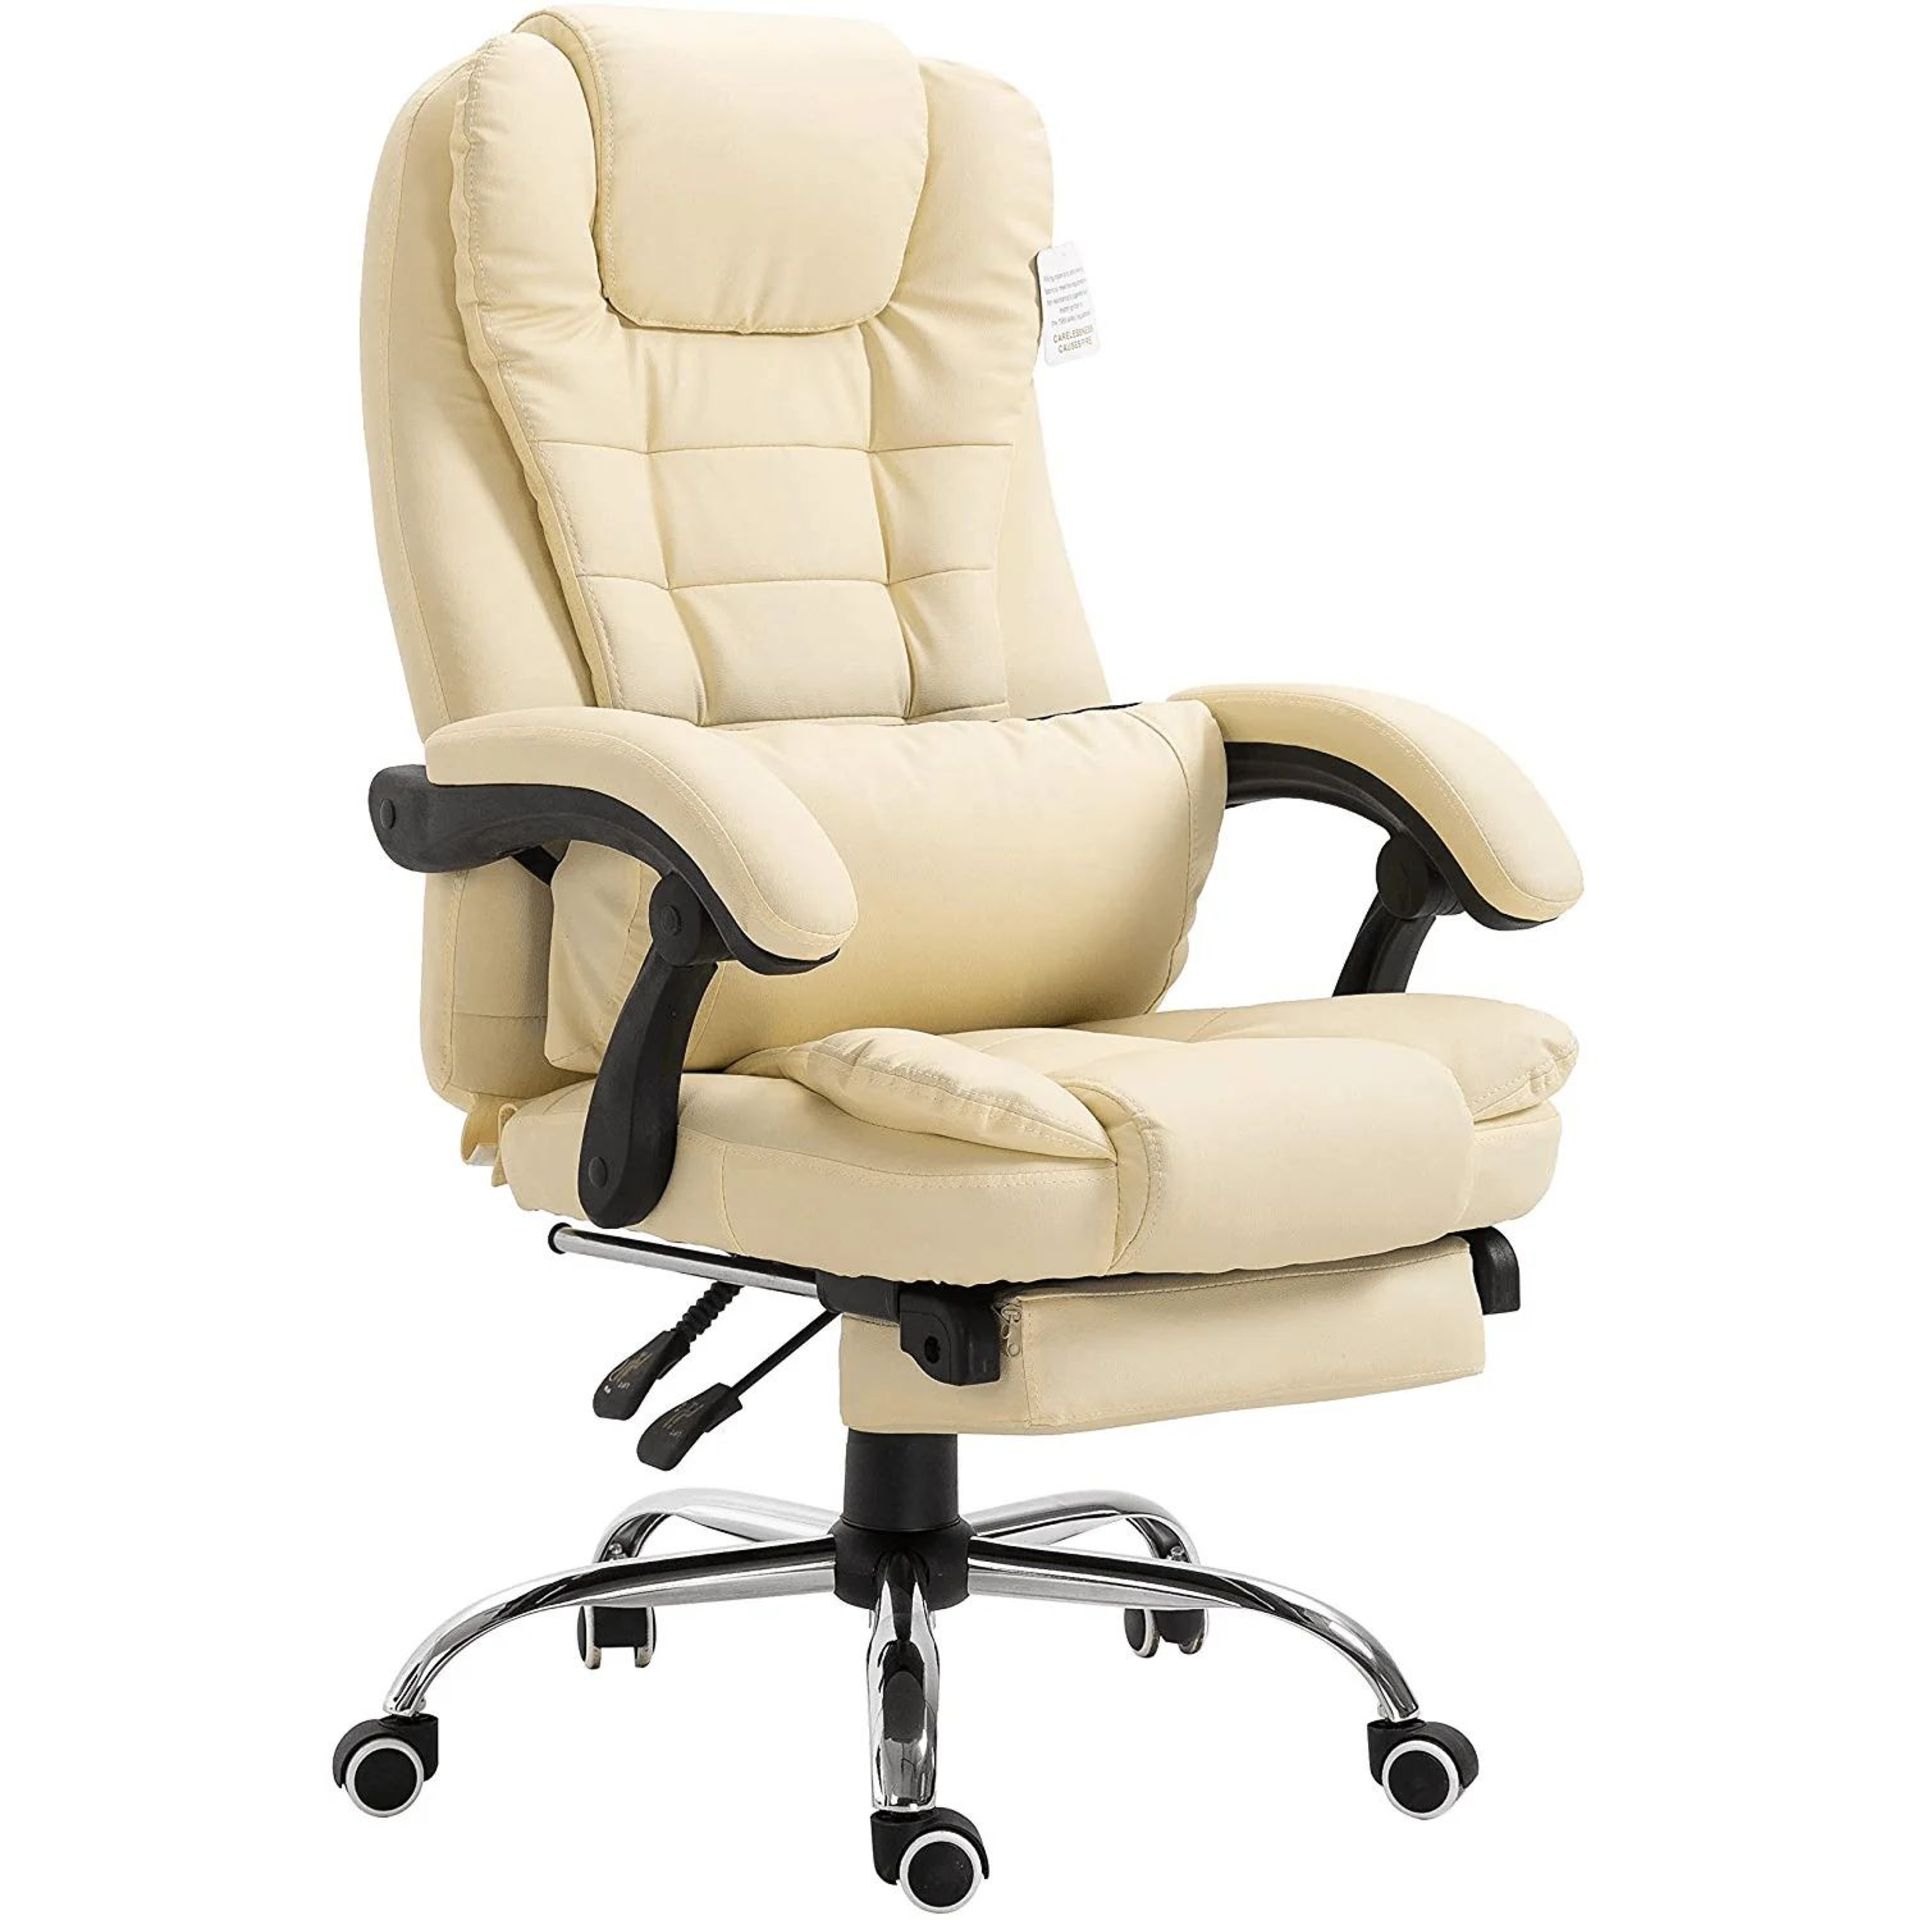 Executive Reclining Computer Desk Chair with Footrest, Headrest and Lumbar Cushion Support